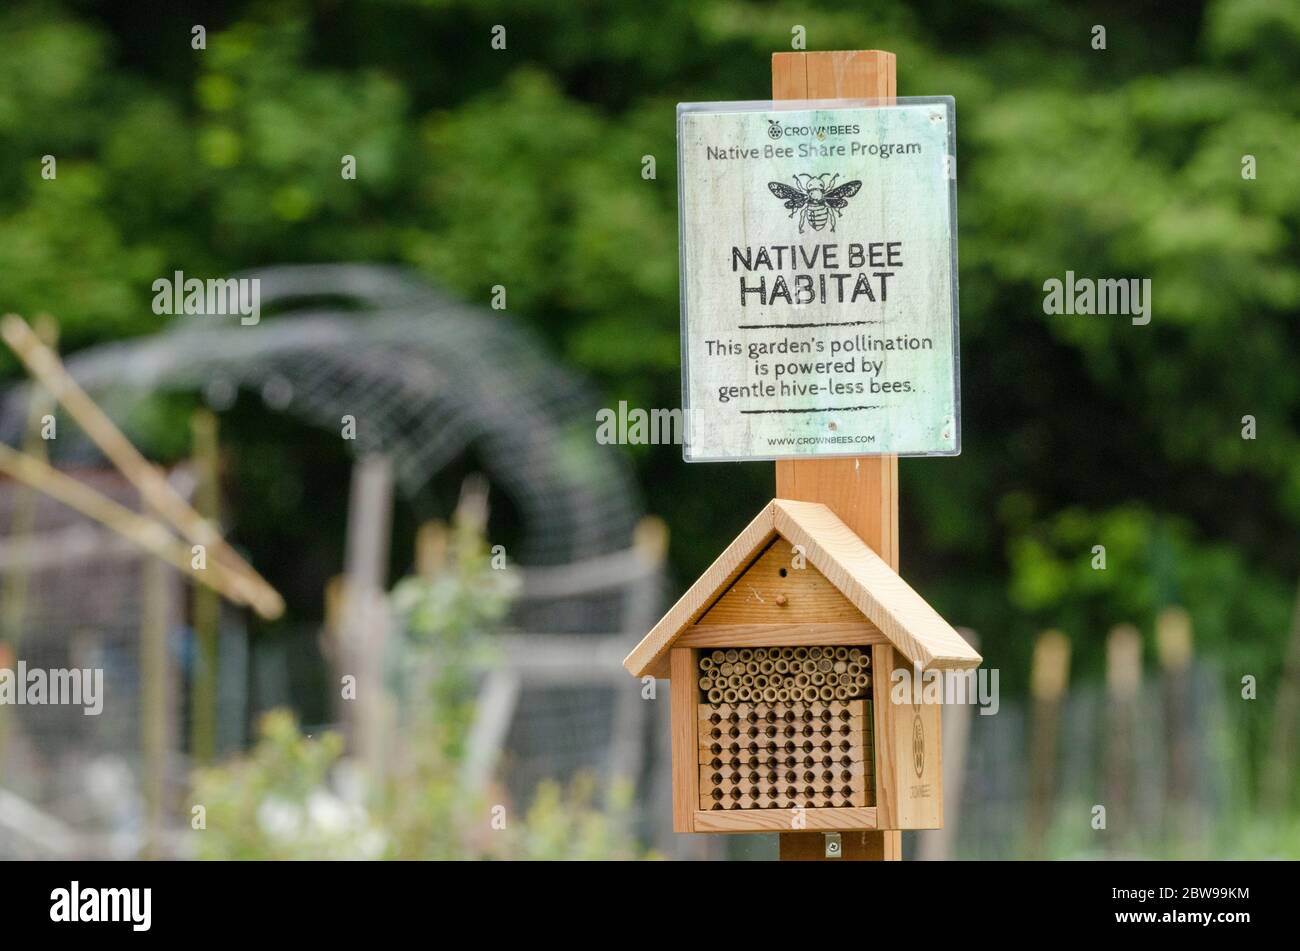 Above a wooden bee house, a 'Native Bee Habitat' sign describes a section at a community garden planted for pollinators. Stock Photo